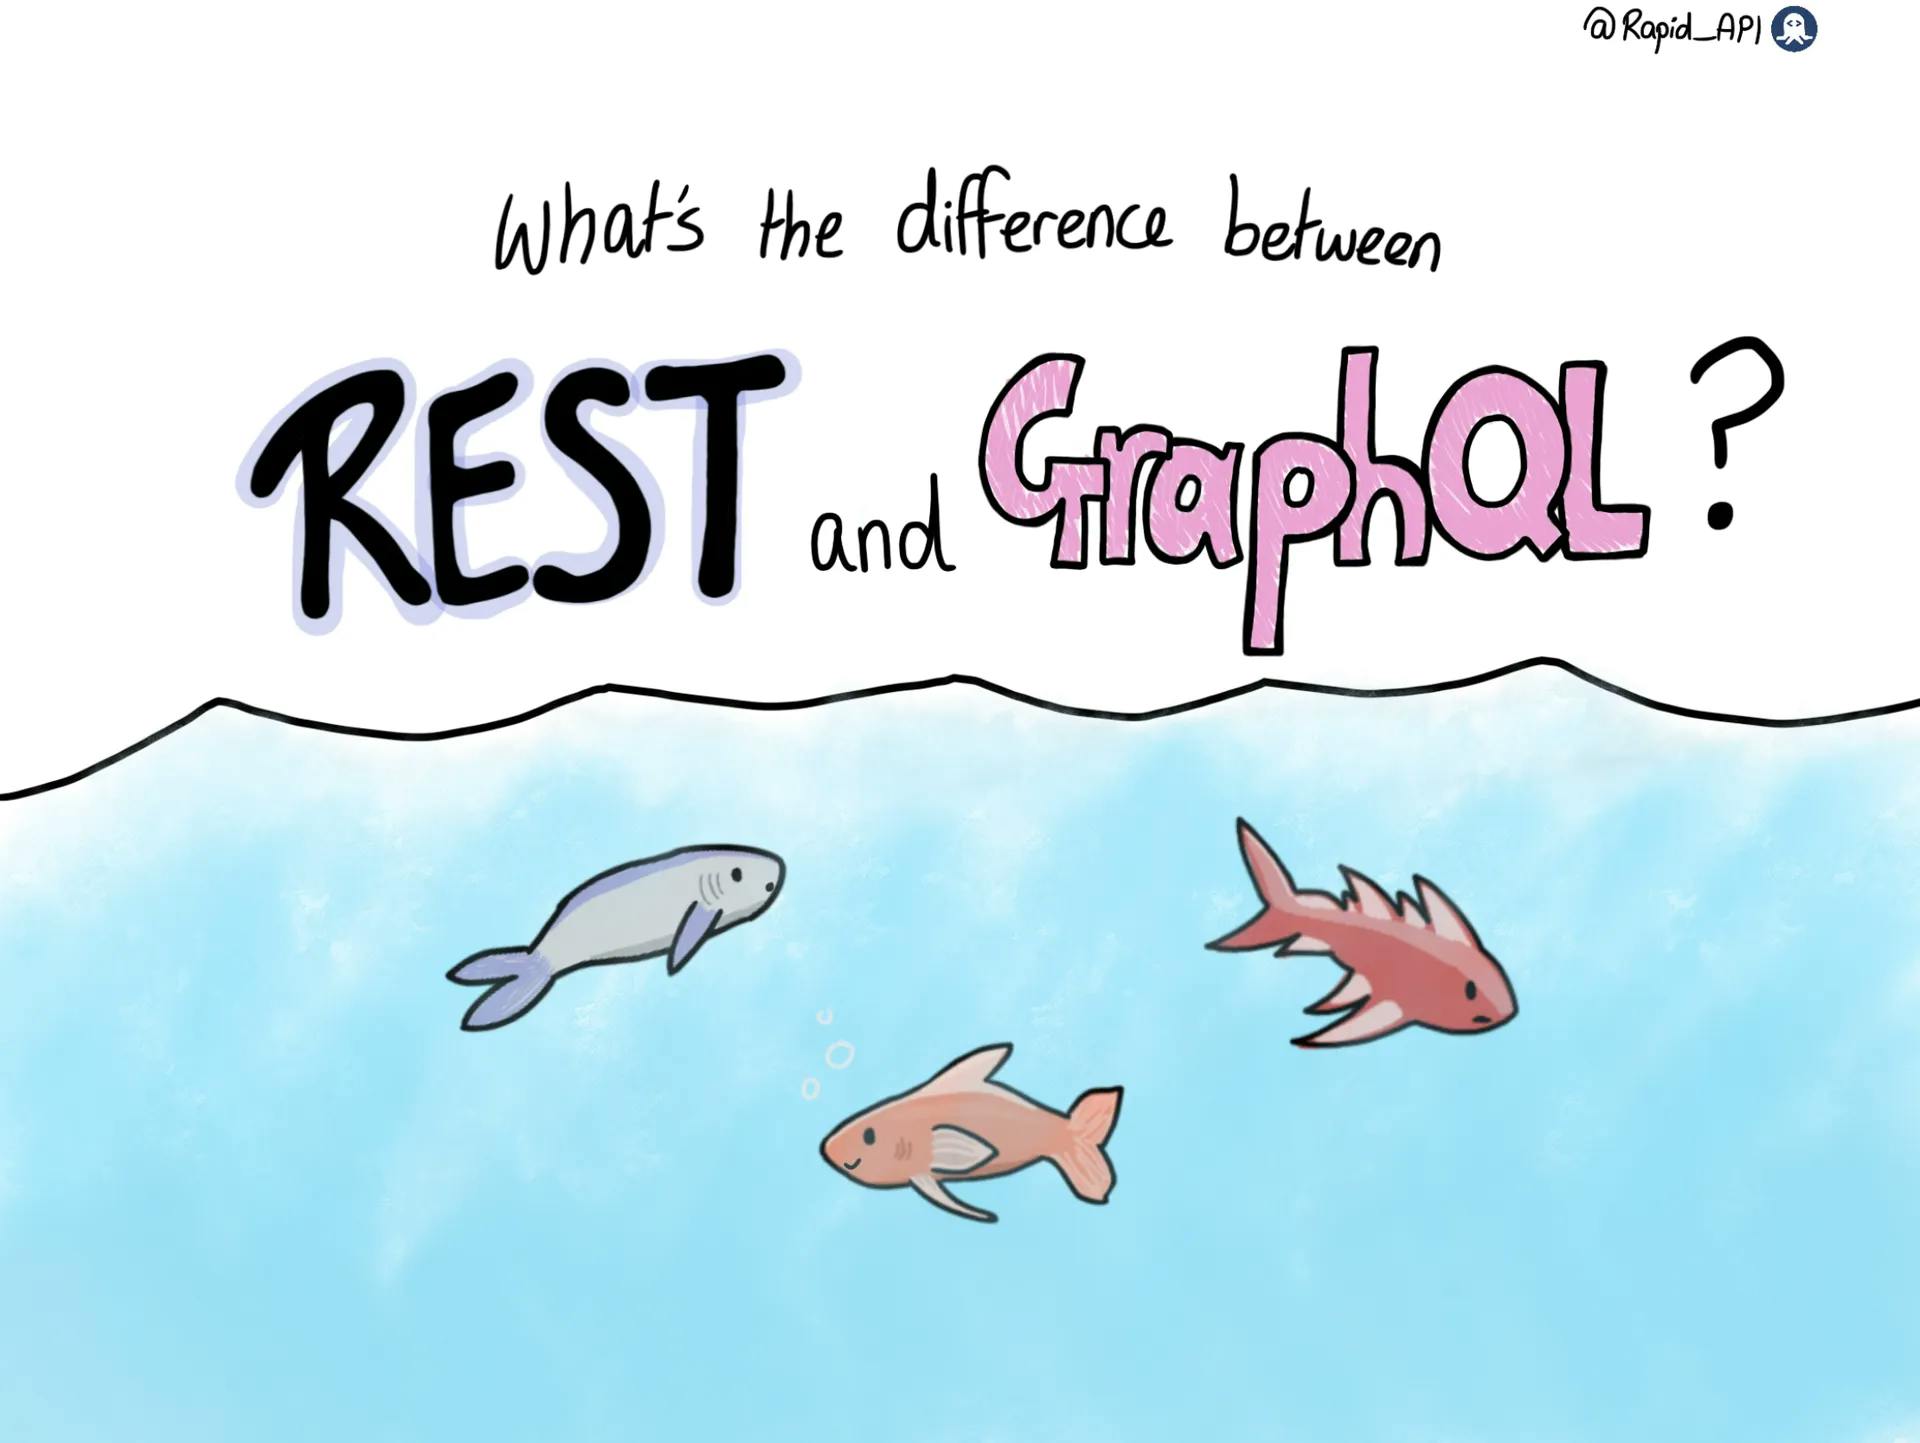 REST vs GraphQL - What's the difference?